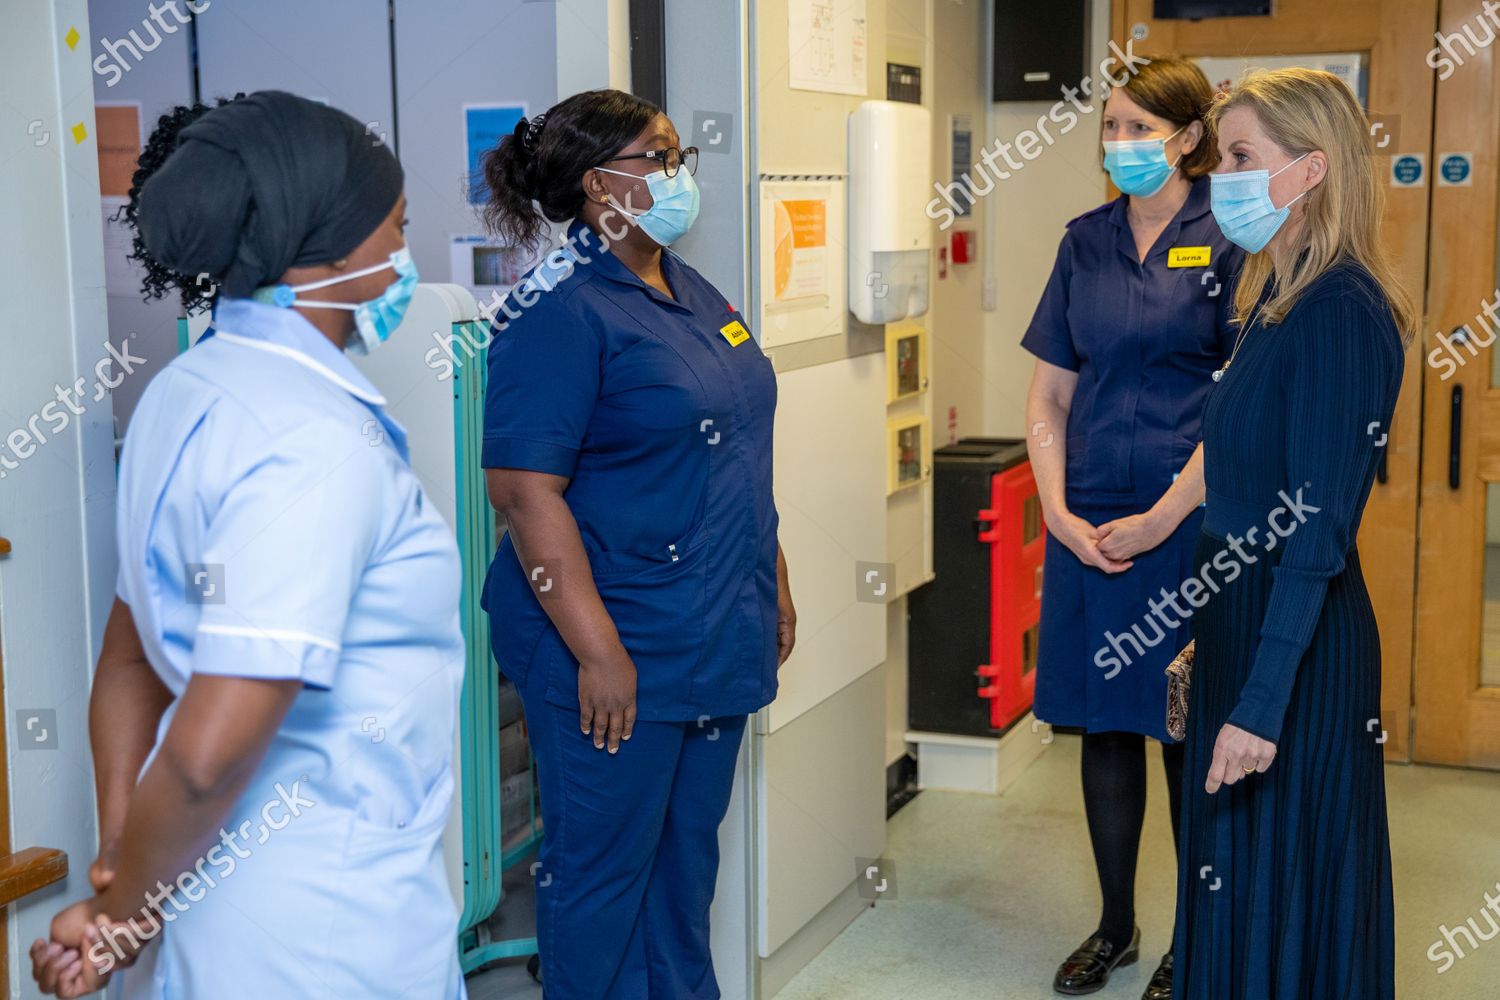 sophie-countess-of-wessex-and-prince-edward-visit-to-frimley-park-hospital-uk-shutterstock-editorial-11900147ah.jpg